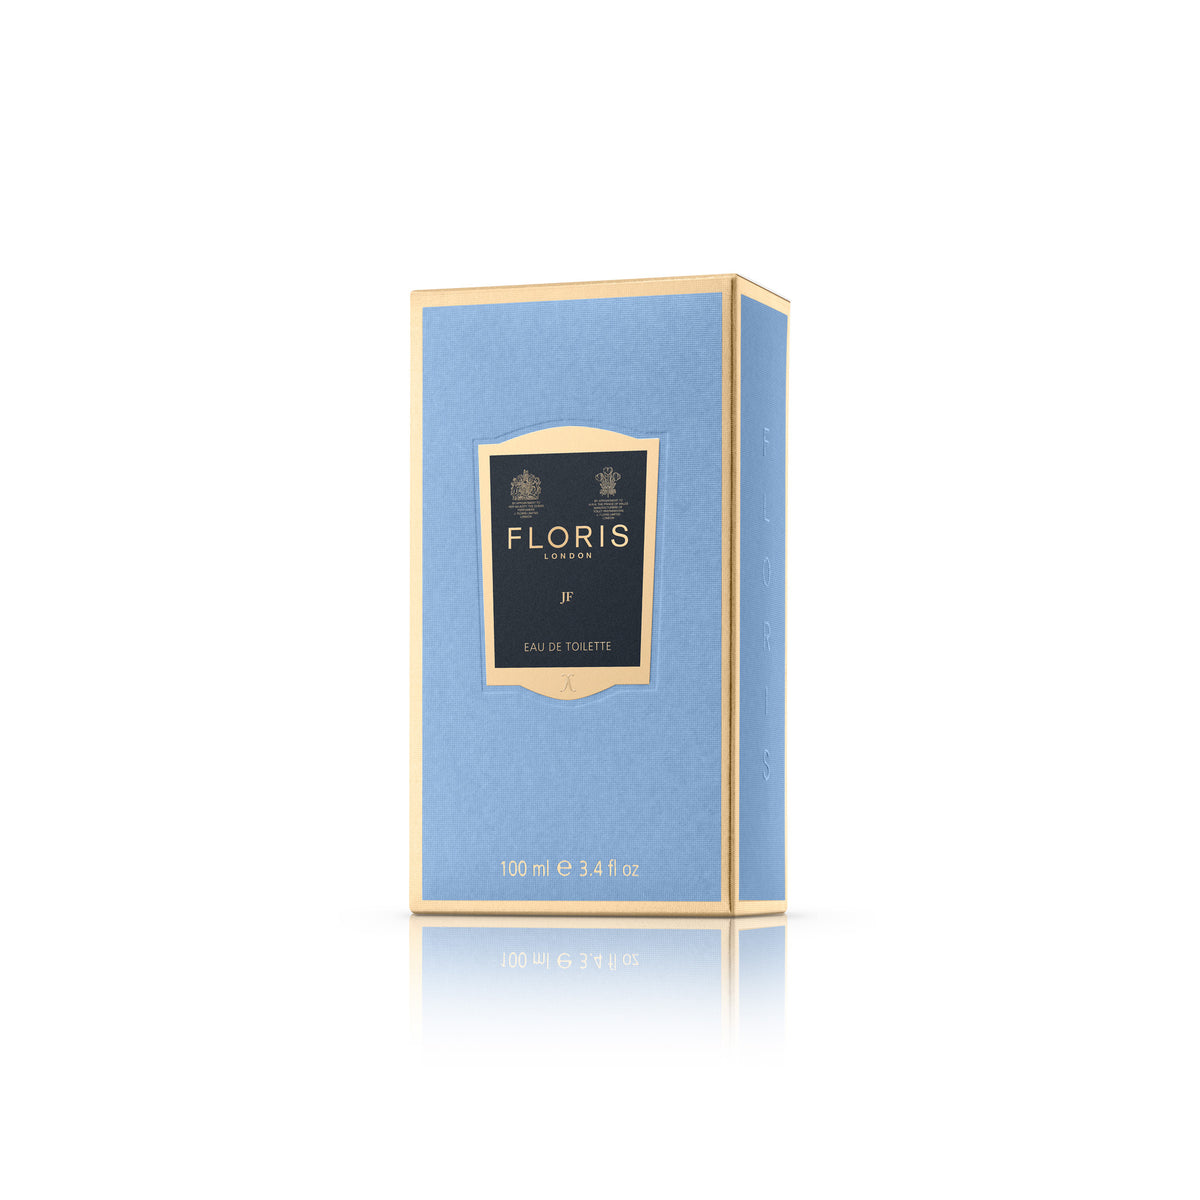 A blue box with a gold logo on it containing the FLORIS JF 100 ML fragrance, by KirbyAllison.com.